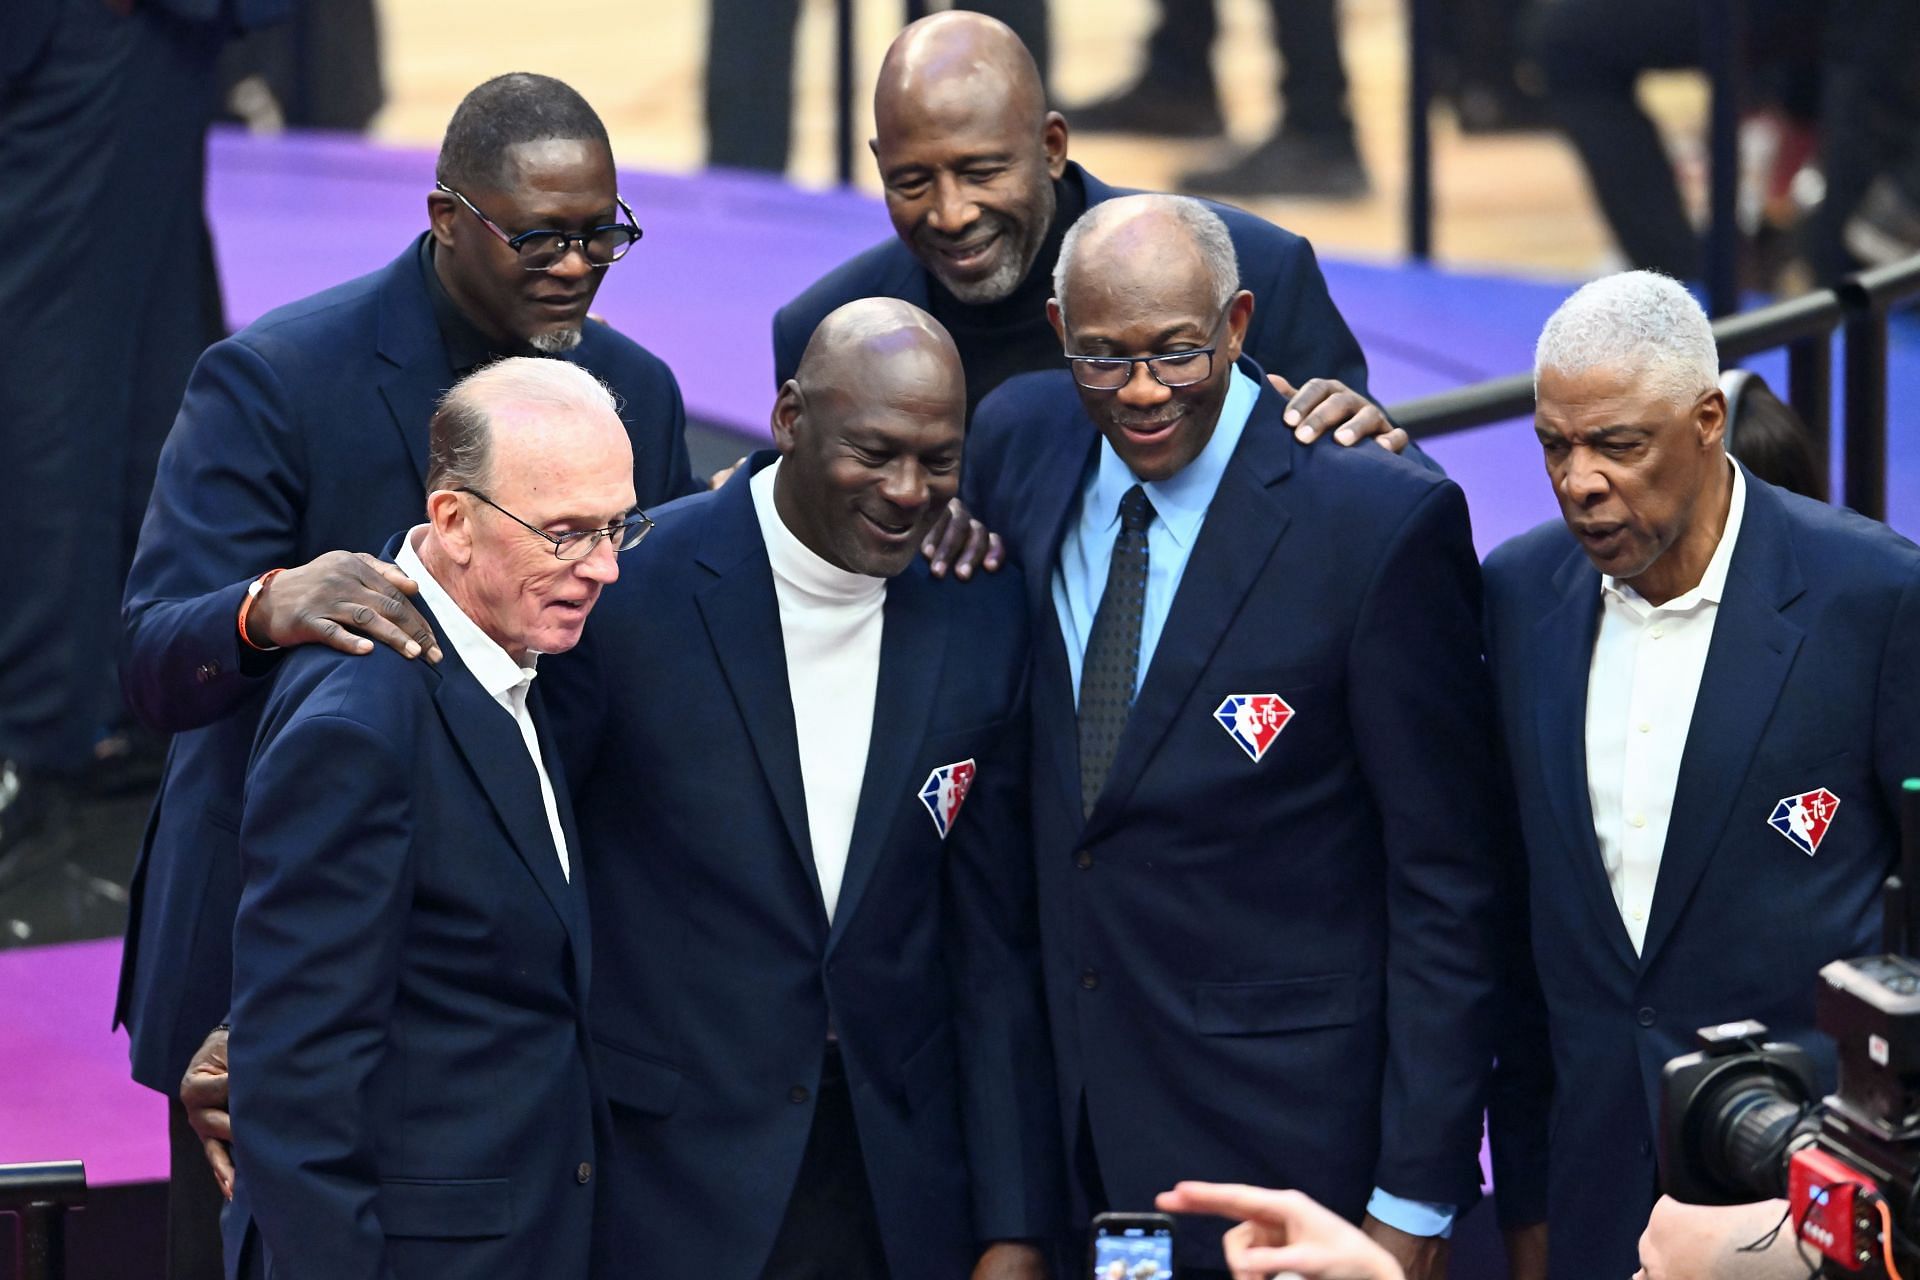 Michael Jordan and other legends at the 2022 NBA All-Star Game